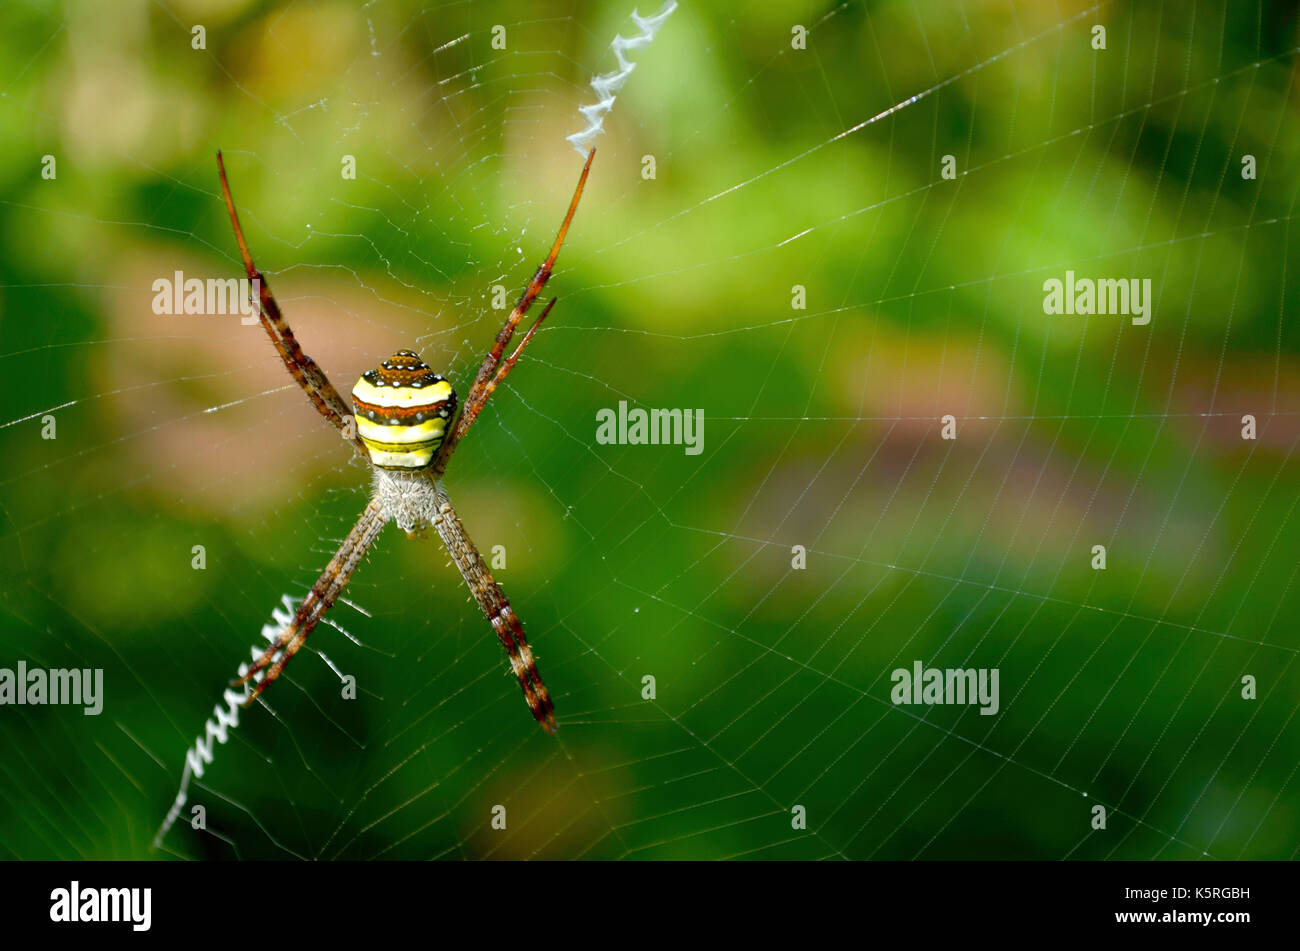 Beautiful spider on web with a blurred green background Stock Photo